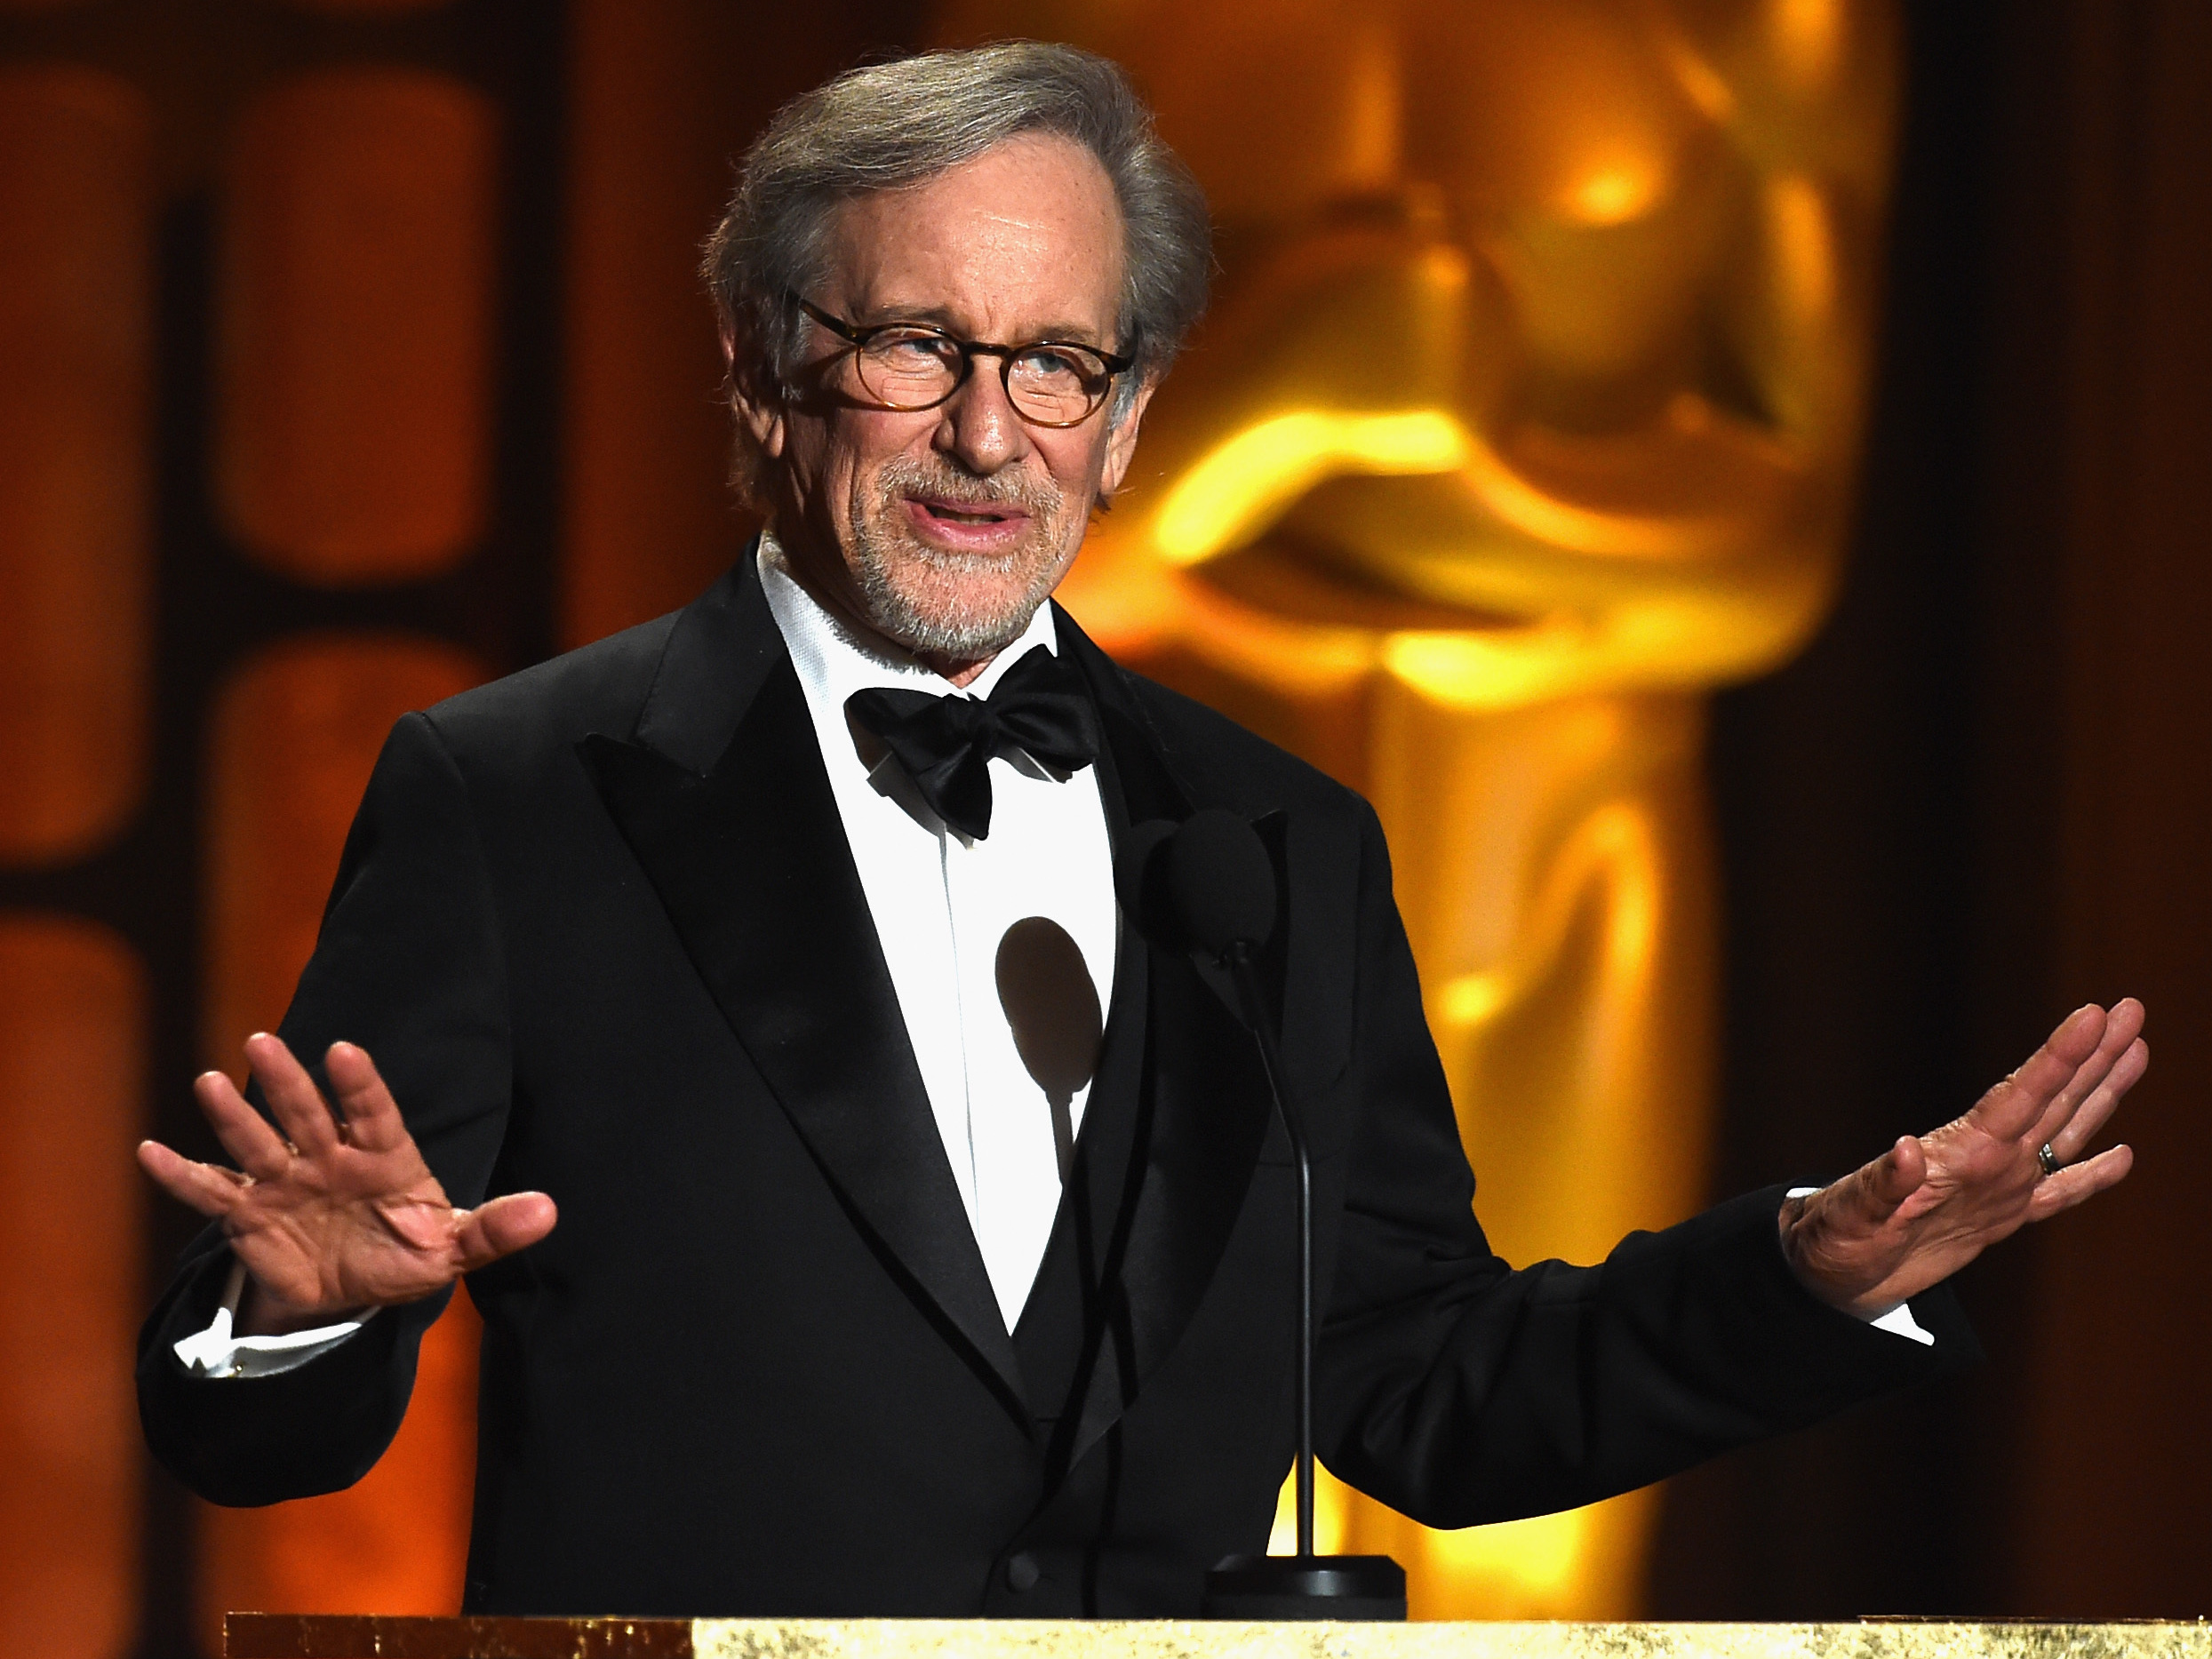 Behind the Scenes with Spielberg: How a Childhood Secret Inspired His Most Personal Film Yet